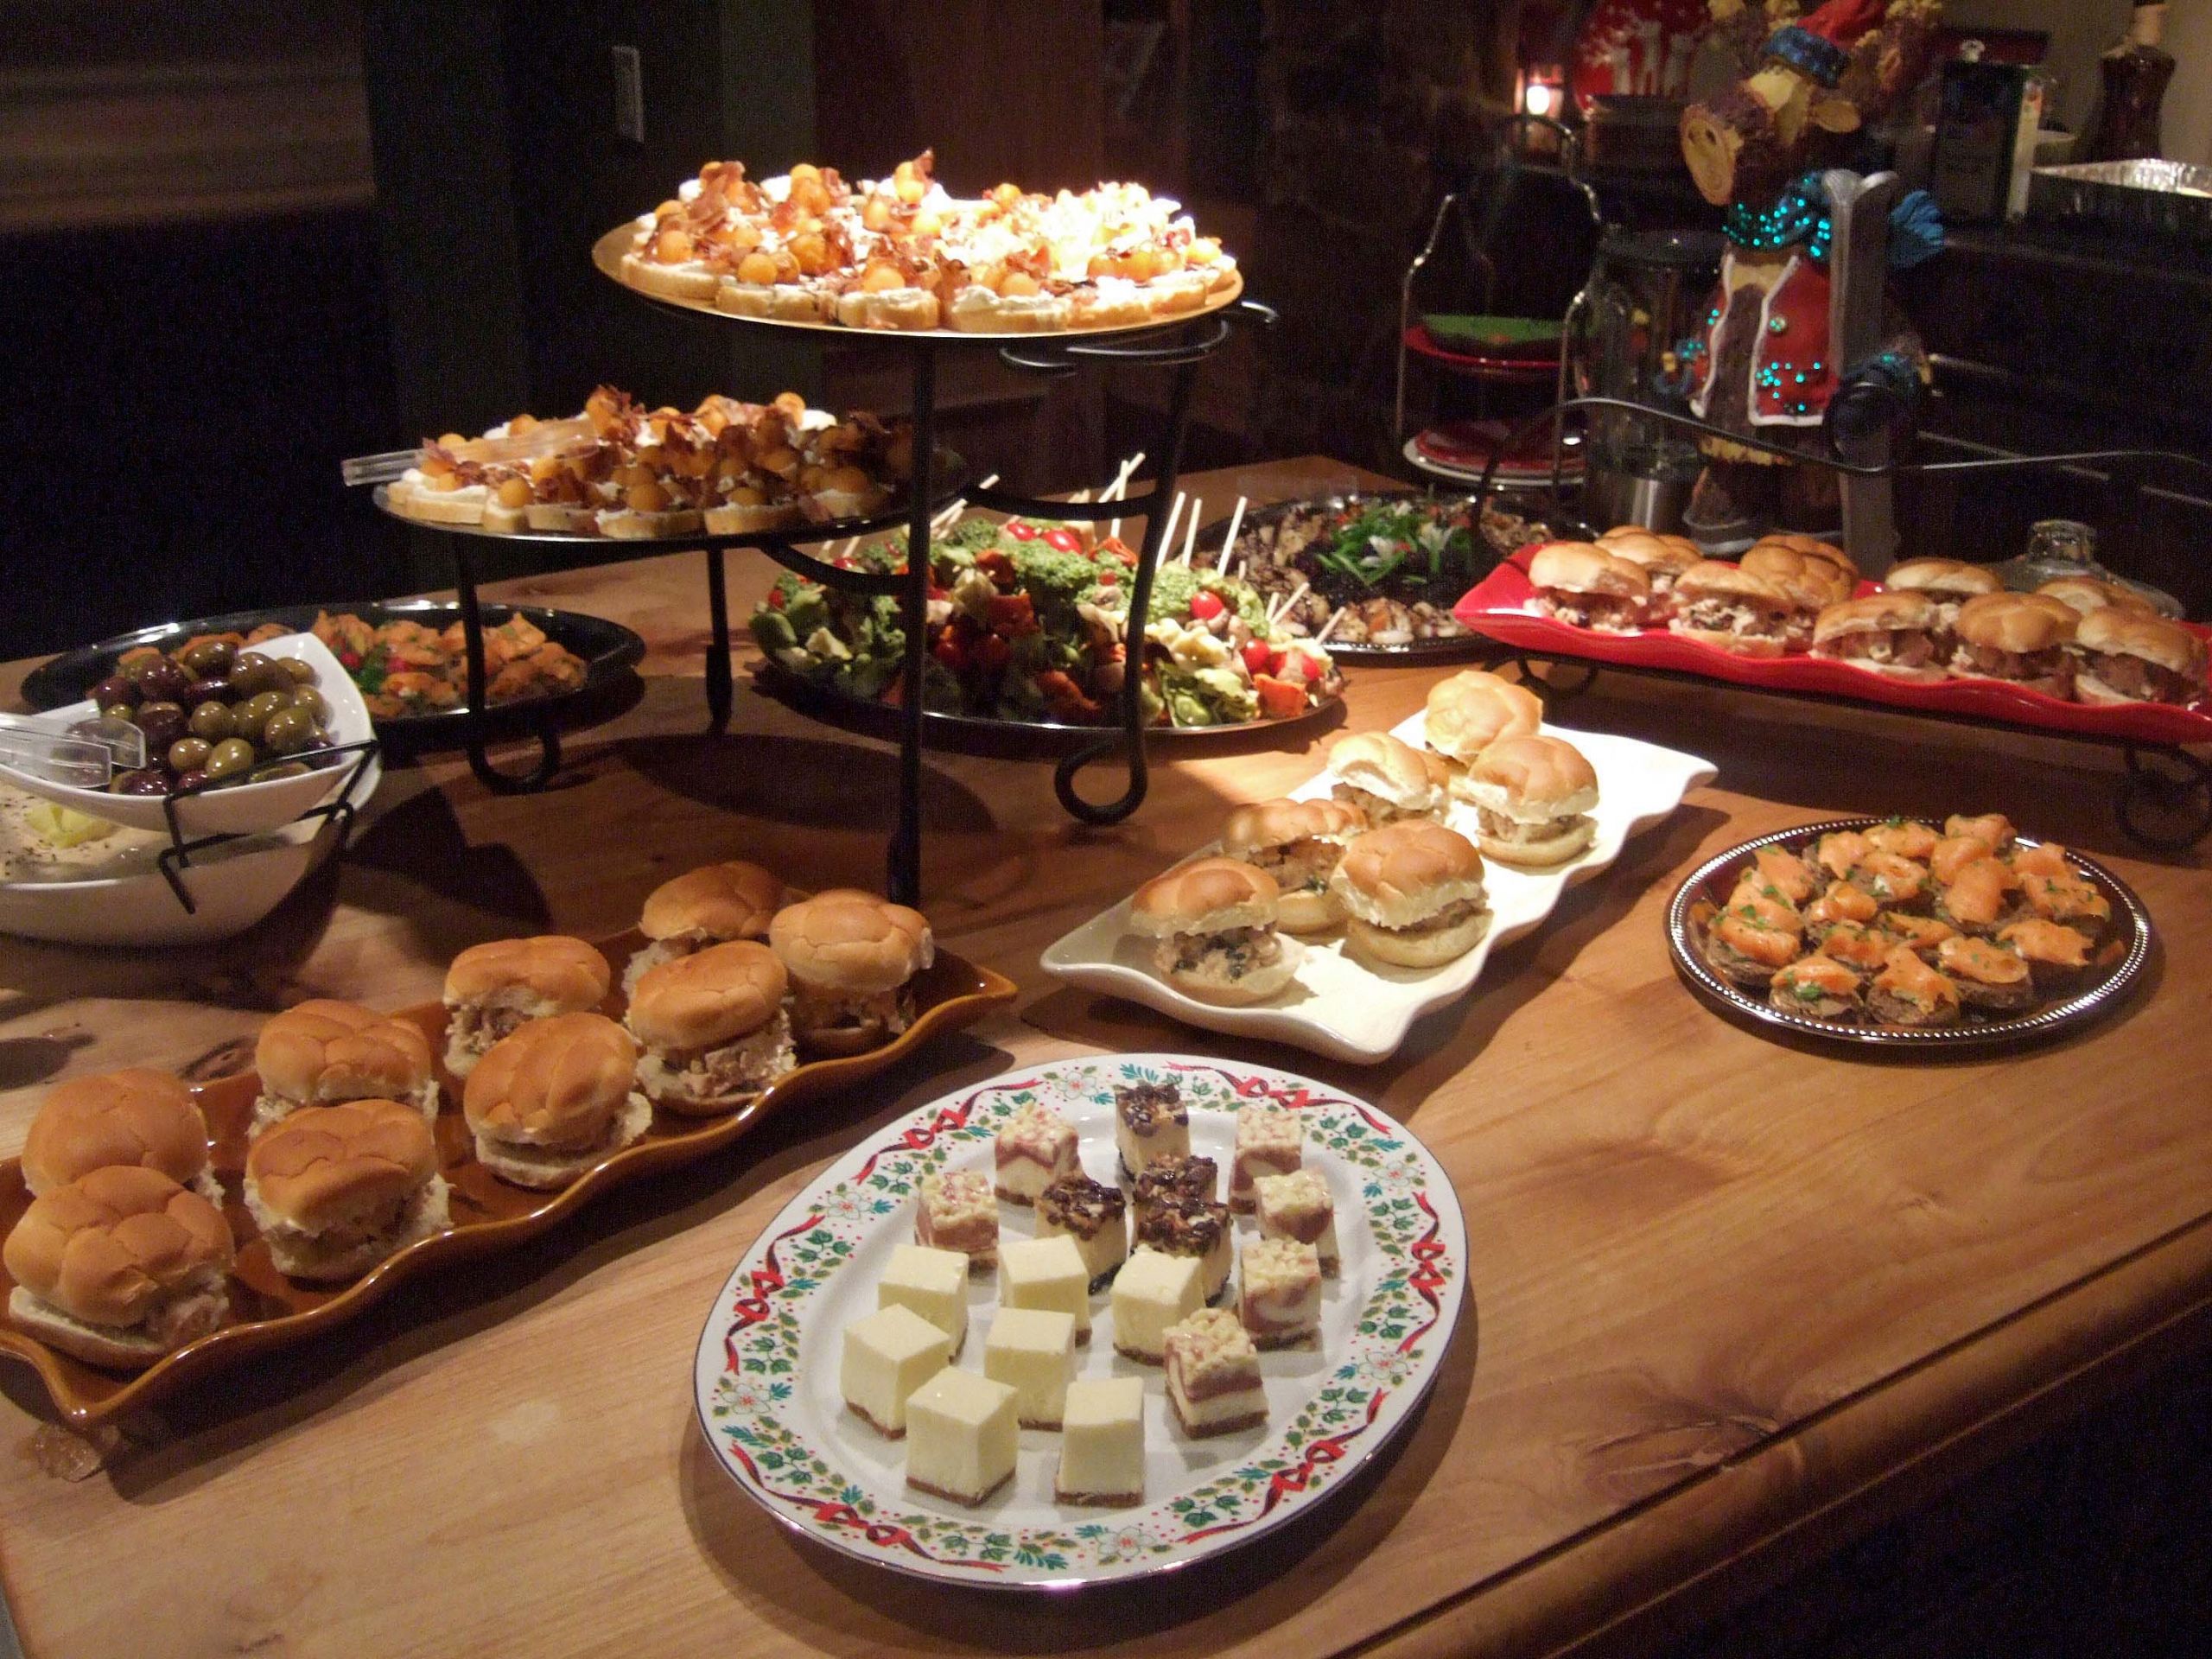 Ideas For Christmas Party Food
 Ideas For A Smashing Christmas Party